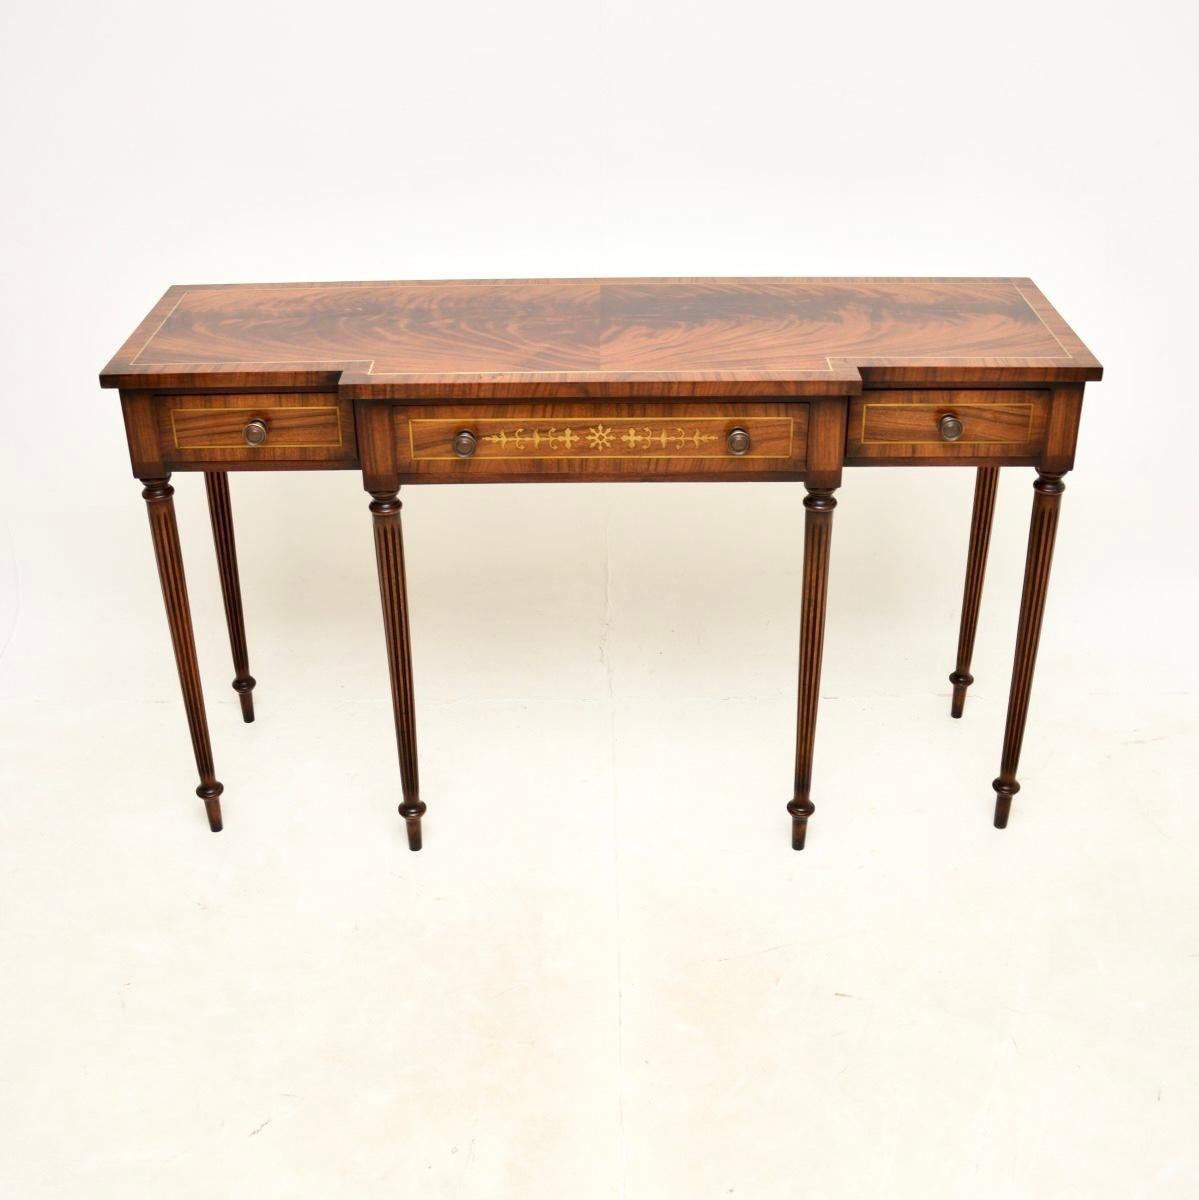 An impressive large antique inlaid brass console table. It is in the Regency style, it was made in England and dates from around the 1950’s.

This is of outstanding quality, the wood has gorgeous grain patterns and the brass inlays compliment it